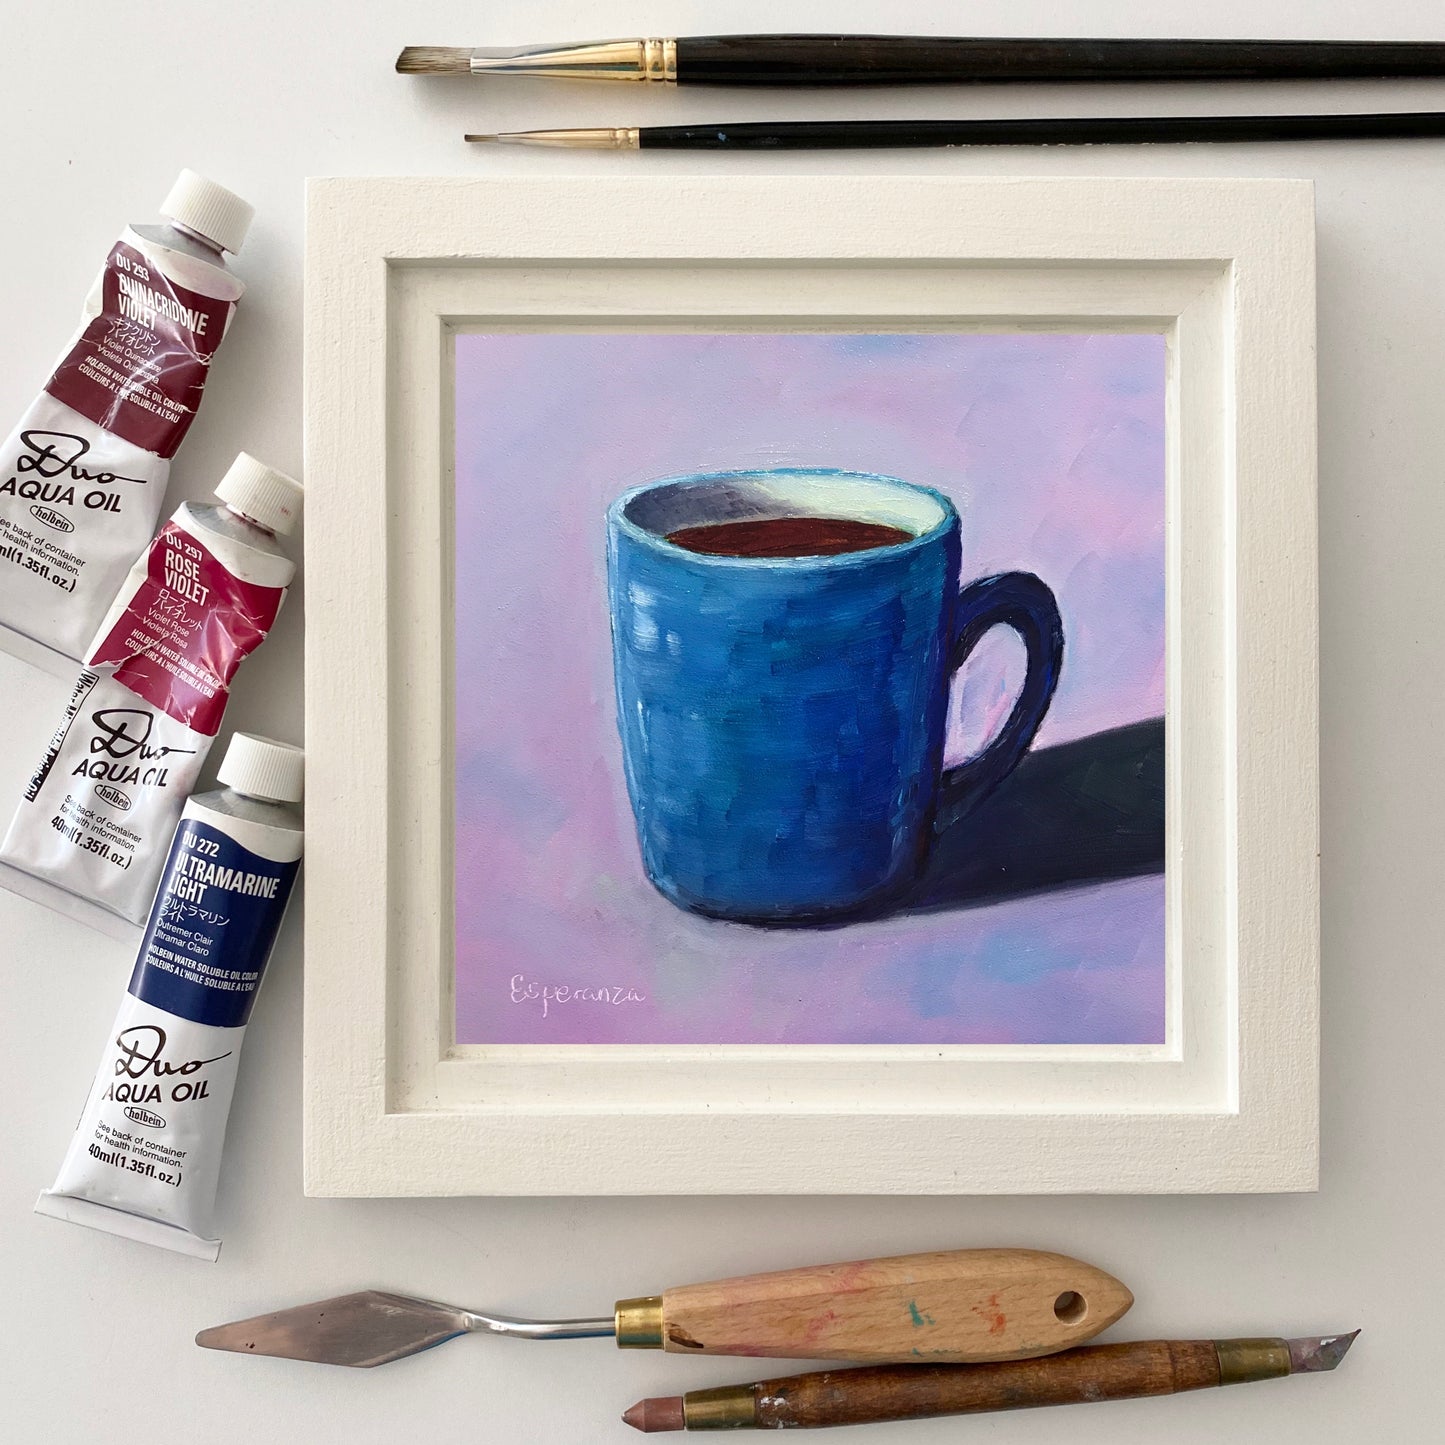 "My Cup is Full" 6x6 original painting